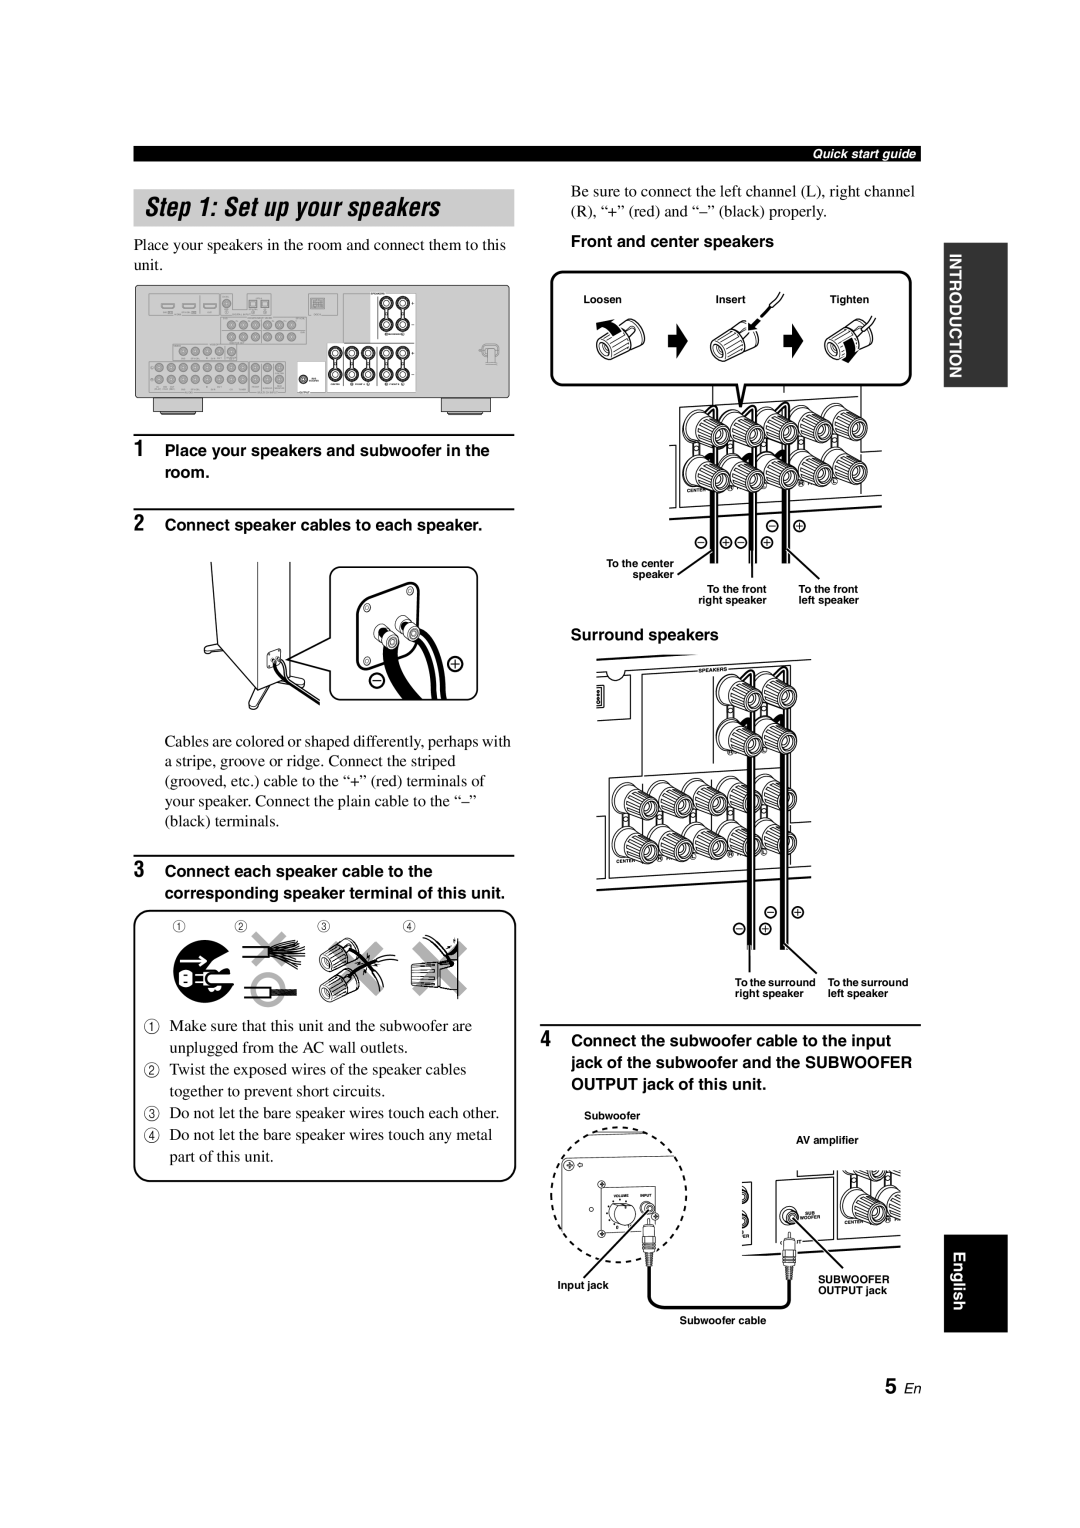 Yamaha DSP-AX463 owner manual 5 En, 1Place your speakers and subwoofer in the room, 2Connect speaker cables to each speaker 